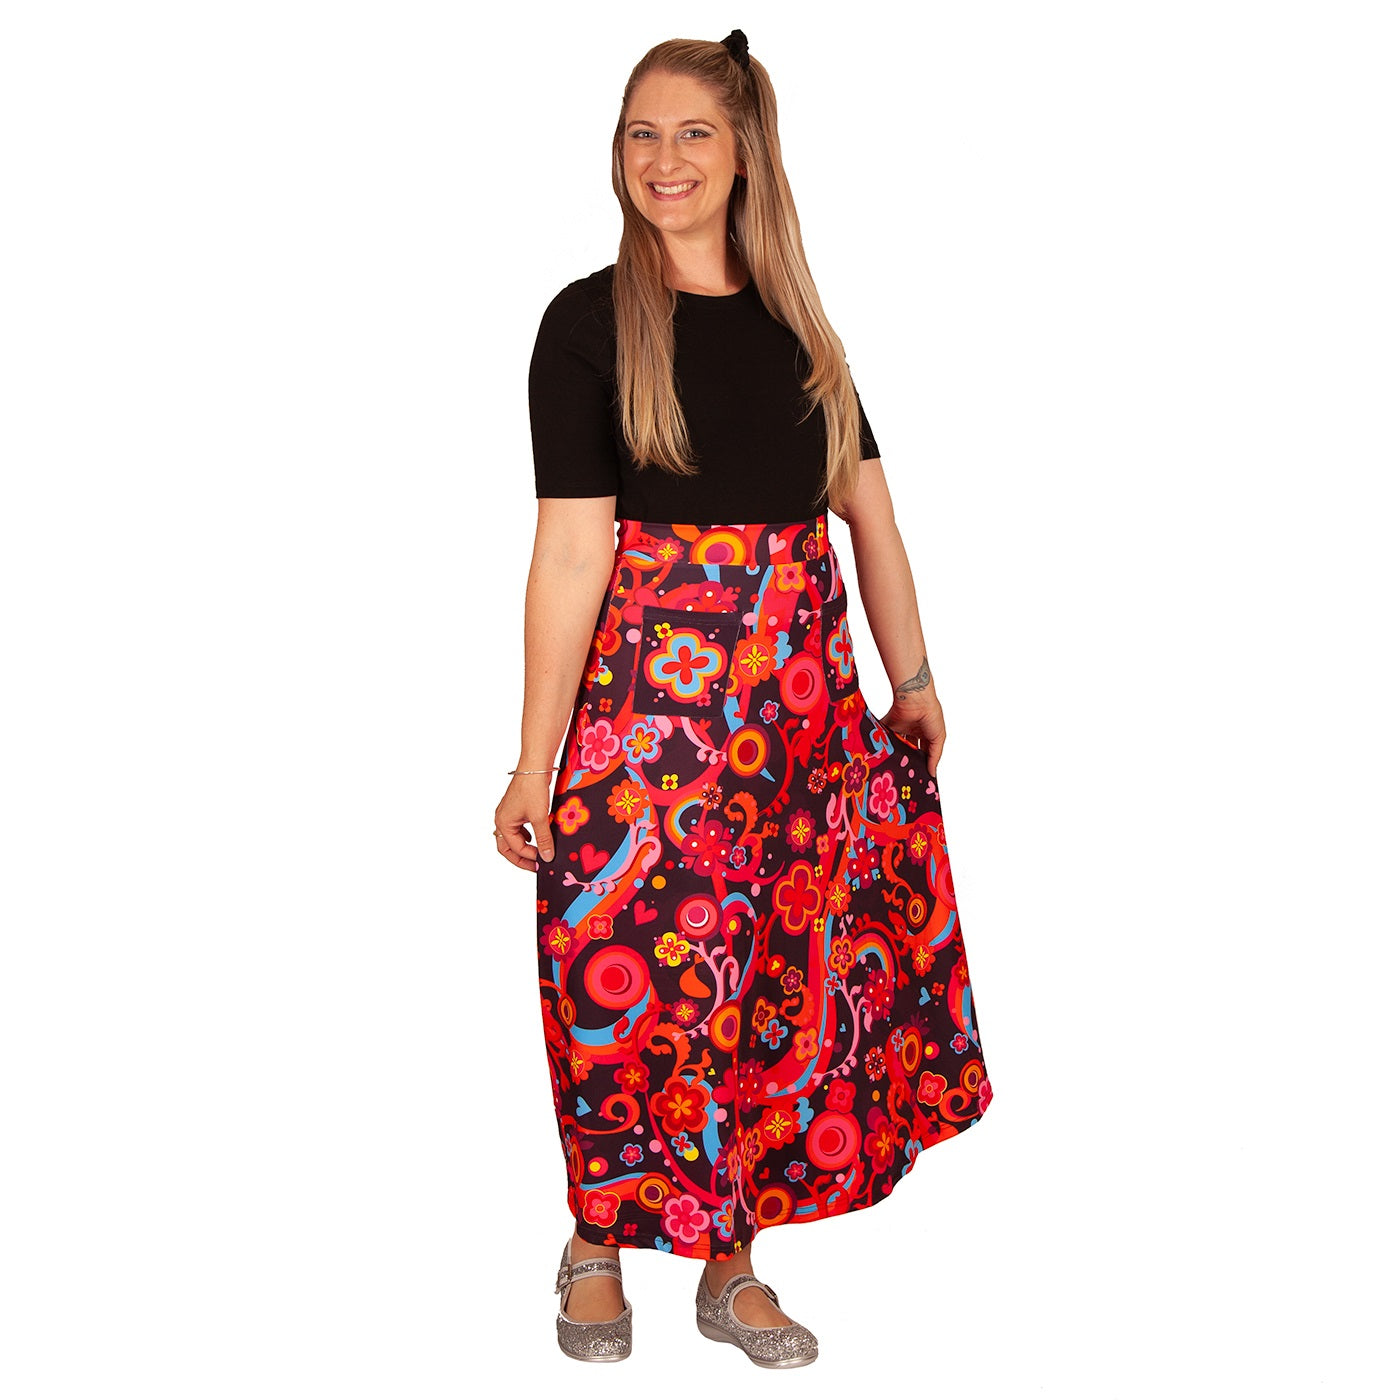 Groovy Maxi Skirt by RainbowsAndFairies.com.au (Flower Power - Psychedelic - Woodstock - Skirt With Pockets - Boho - Mod Retro - Vintage Inspired) - SKU: CL_MAXIS_GROOV_ORG - Pic-06